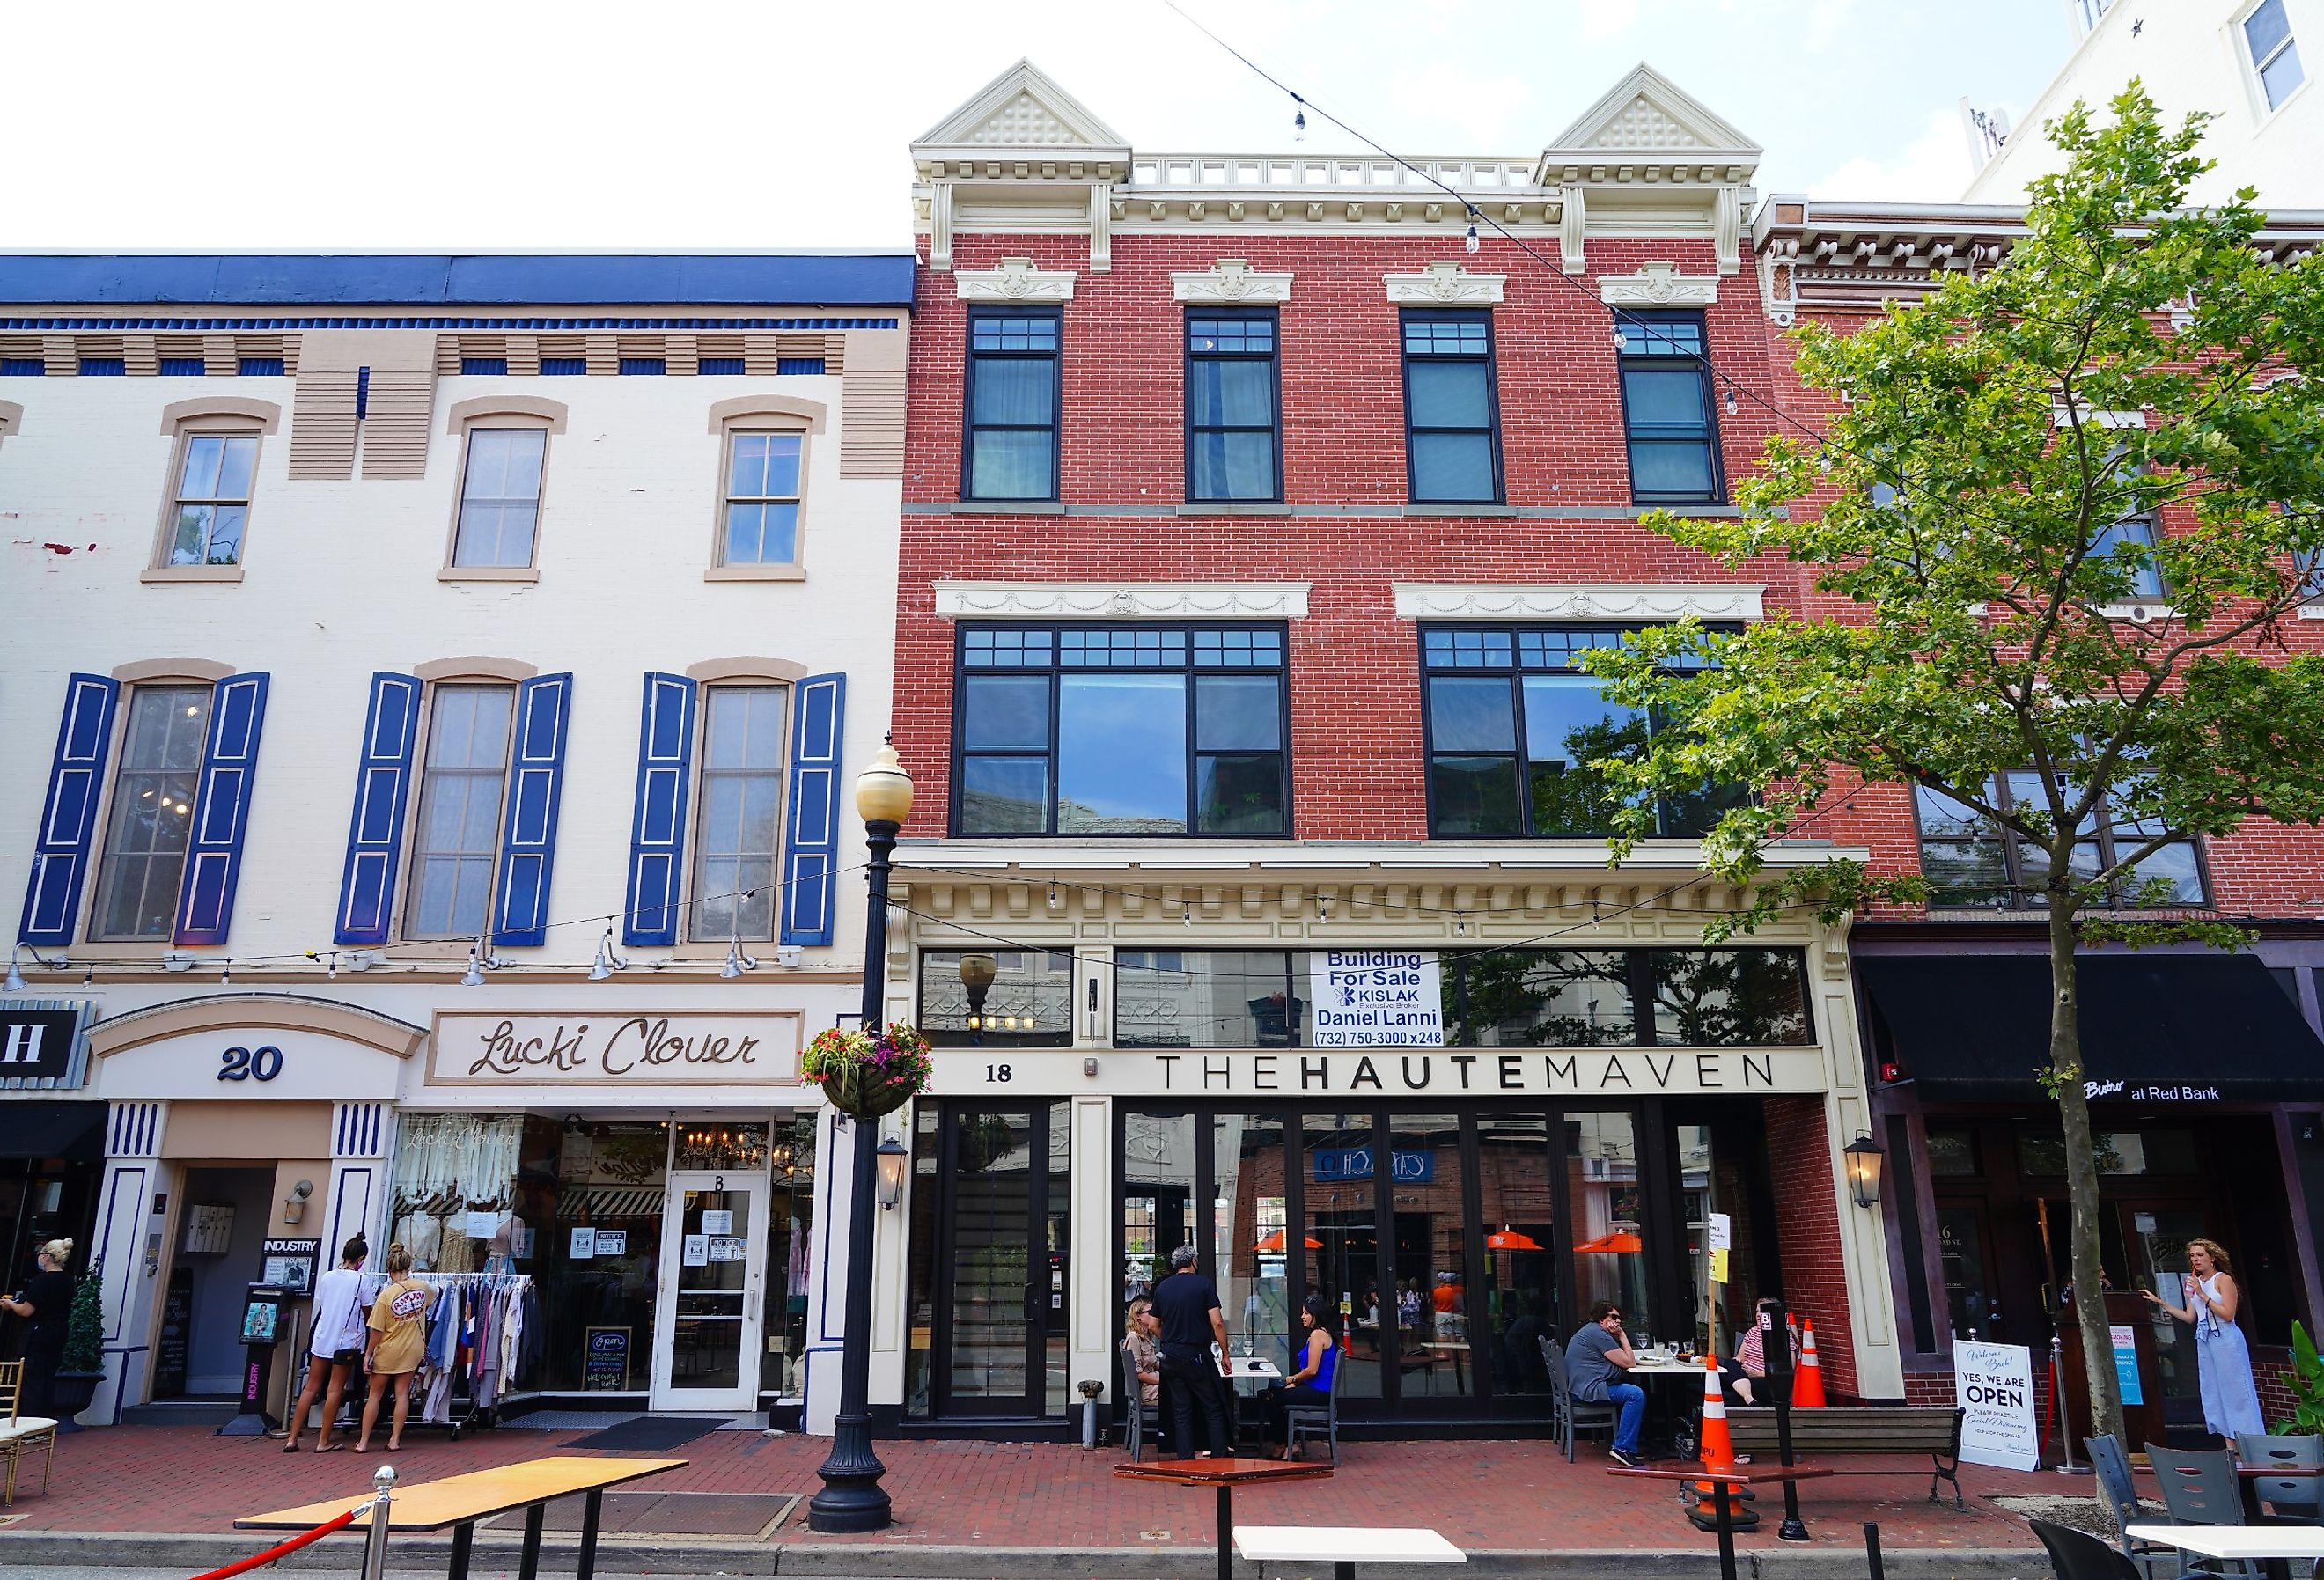 Downtown buildings on Broad Street in Red Bank, New Jersey. Image credit EQRoy via Shutterstock.com